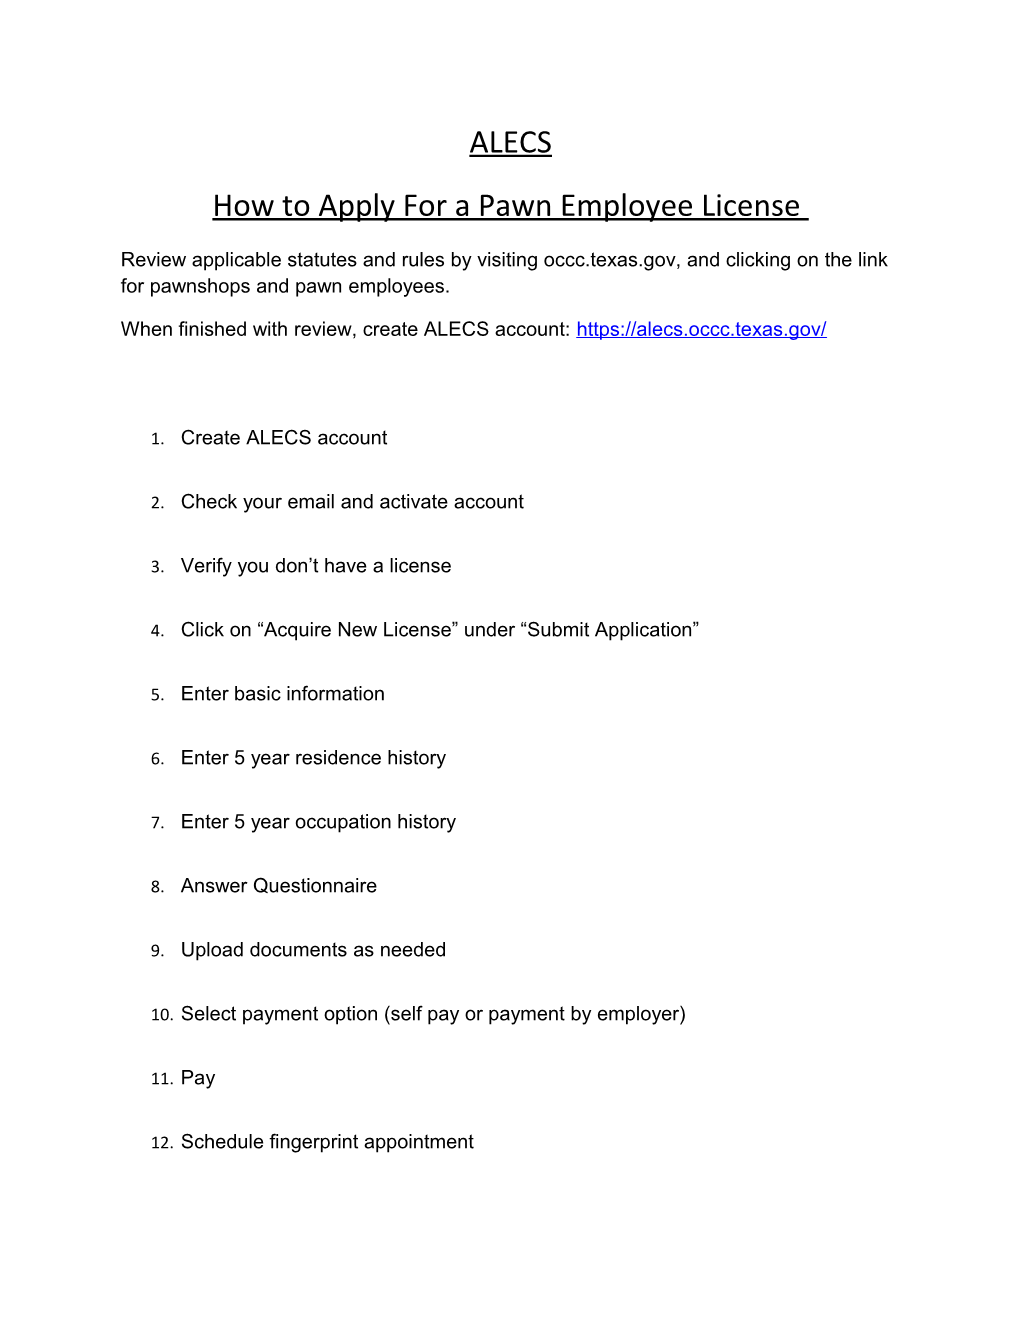 How to Apply for a Pawn Employee License